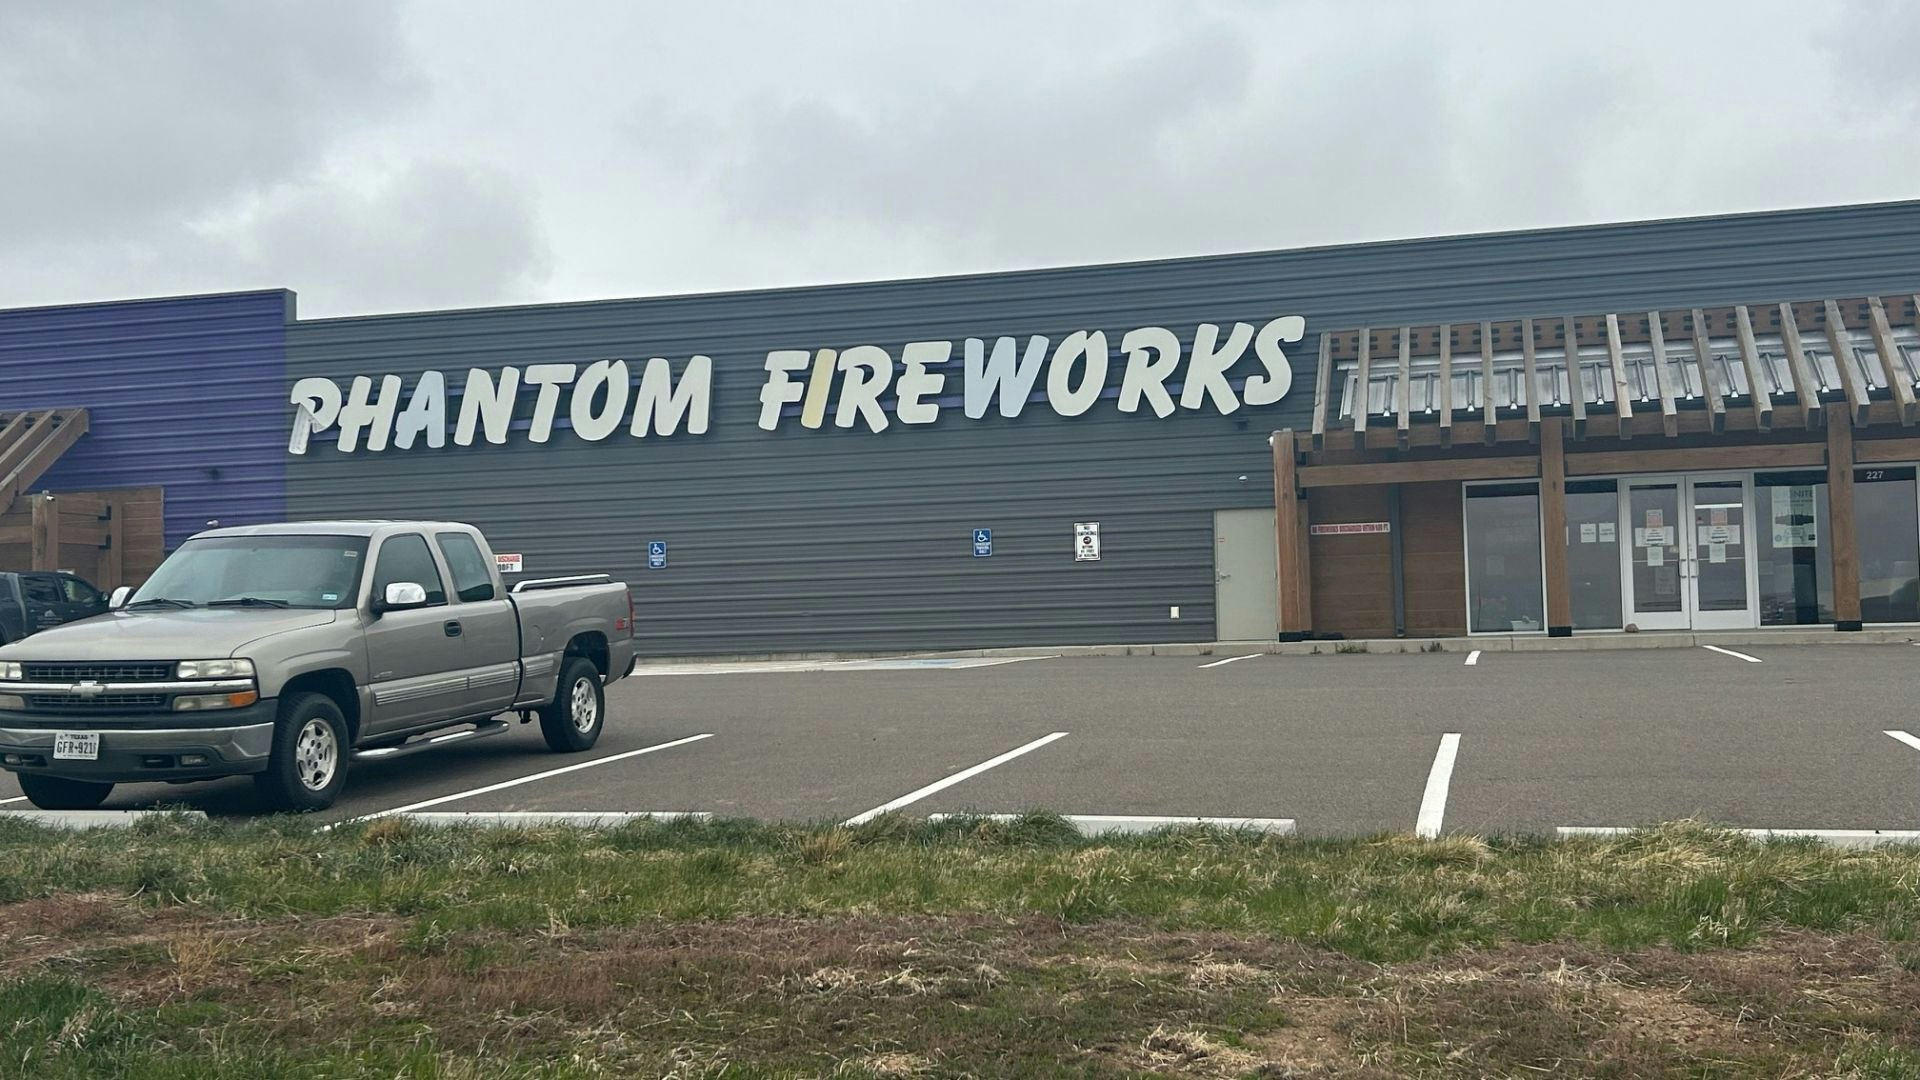 Mike Elliott, operations manager of Jurassic Fireworks and Artillery World, claims Phantom Fireworks' employees and owners are behind a push to slander his businesses.